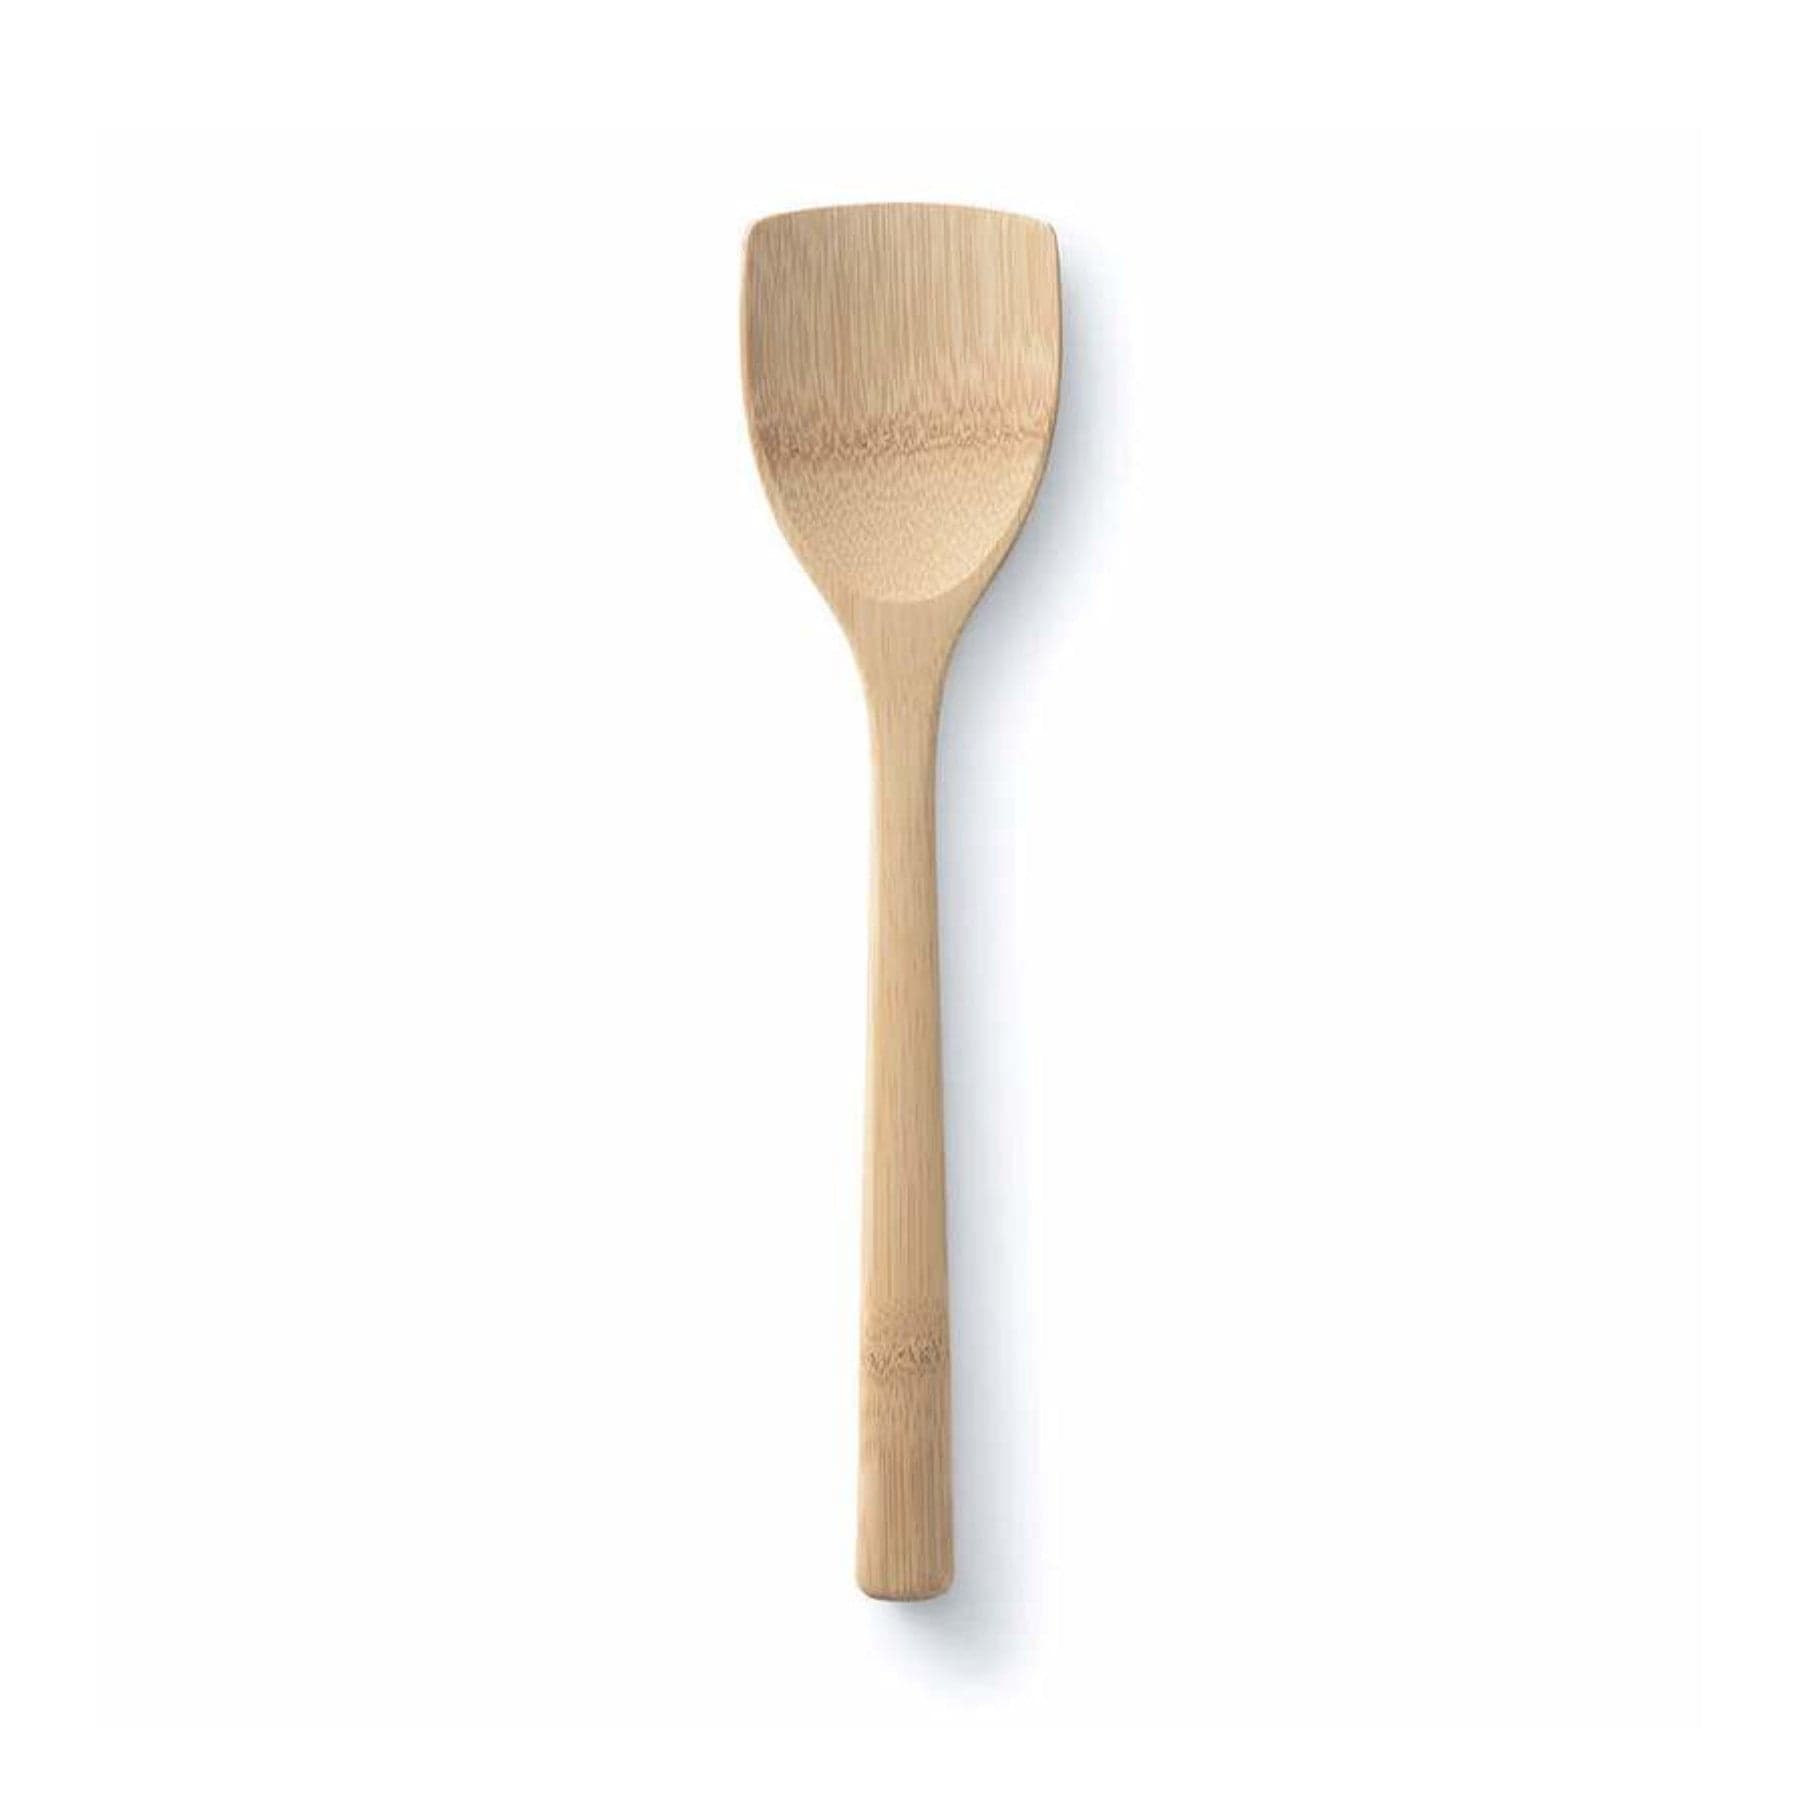 Wooden spatula on white background, bamboo cooking utensil, eco-friendly kitchen tool, natural flat spatula, isolated wooden turner